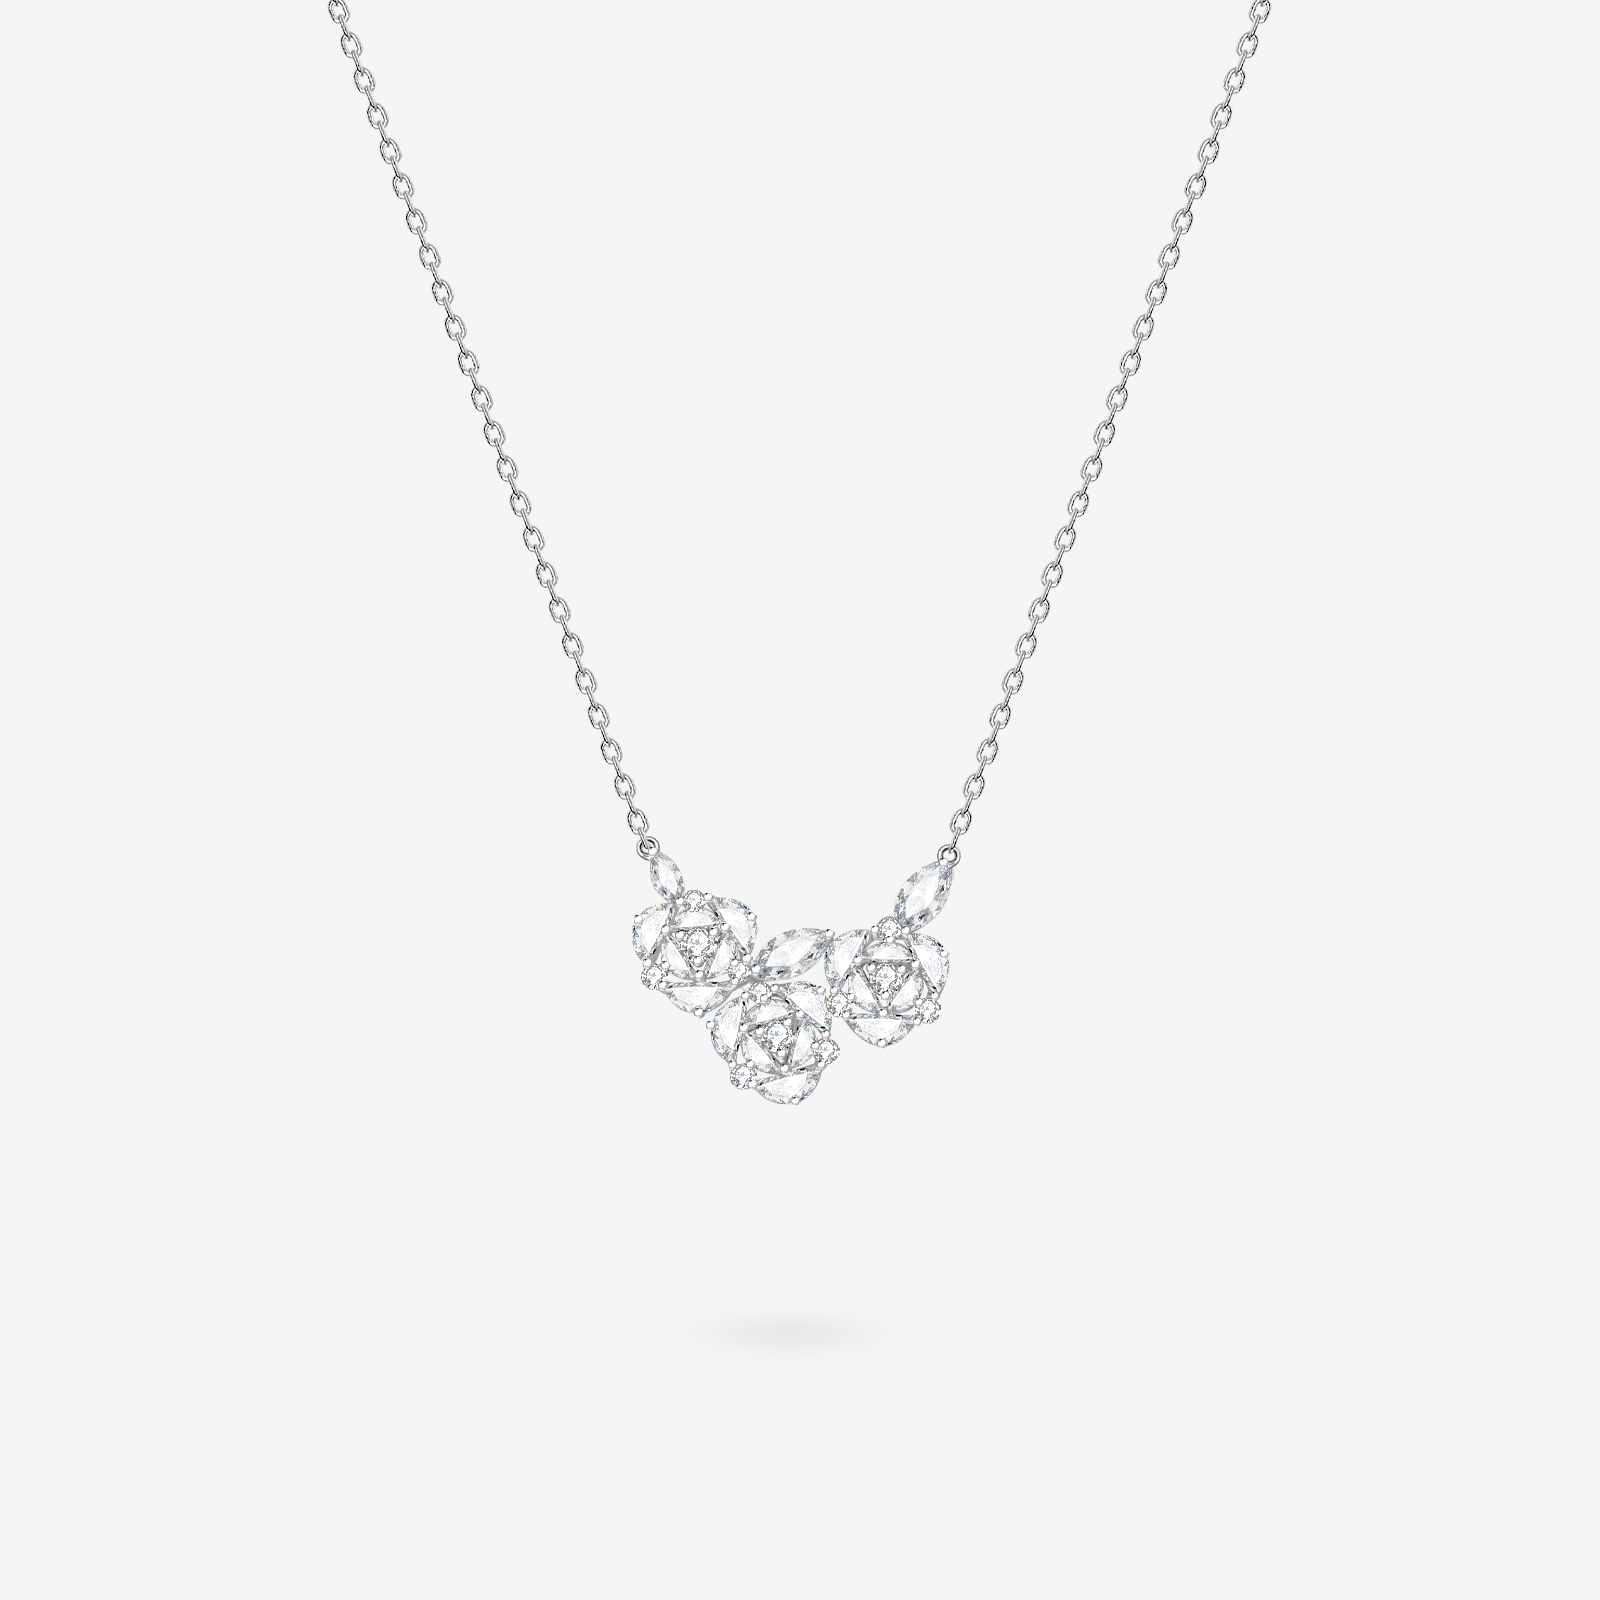 FANCI ME "Three Roses" Sterling Silver Necklace Main